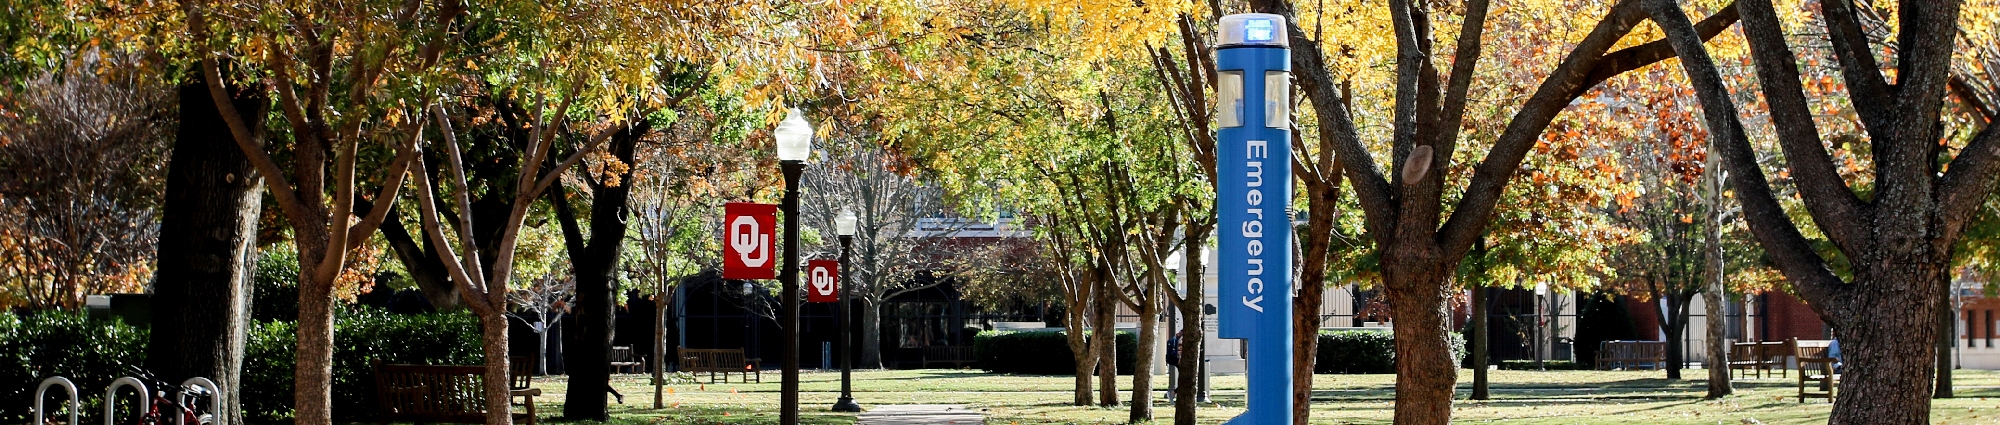 Exterior shot of campus in the fall with emergency blue pole in the foreground